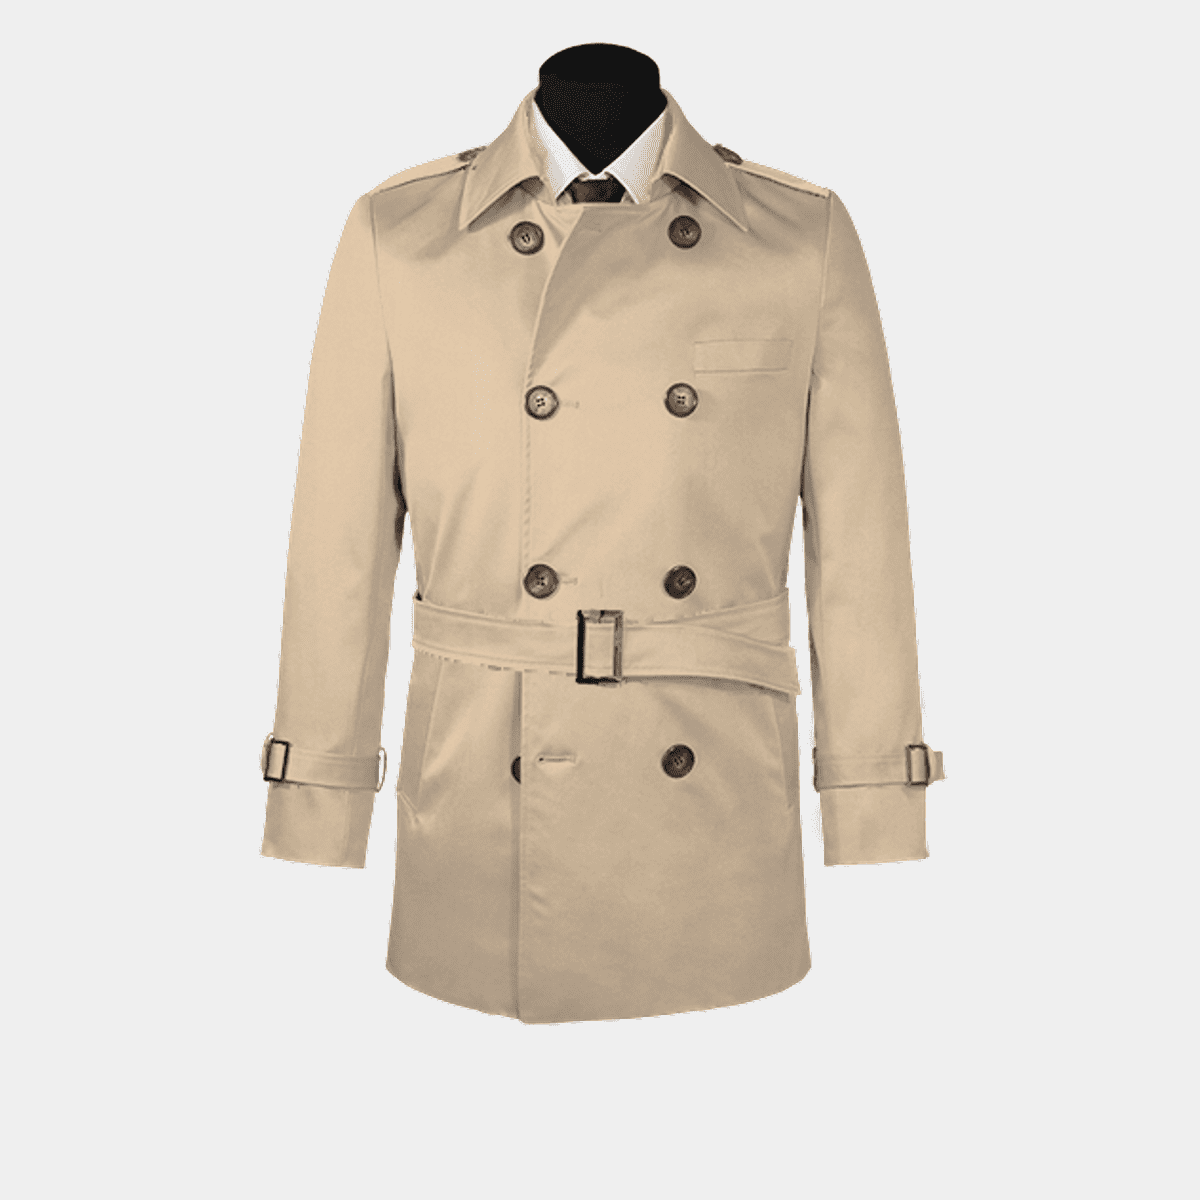 Beige belted trench coat with epaulettes